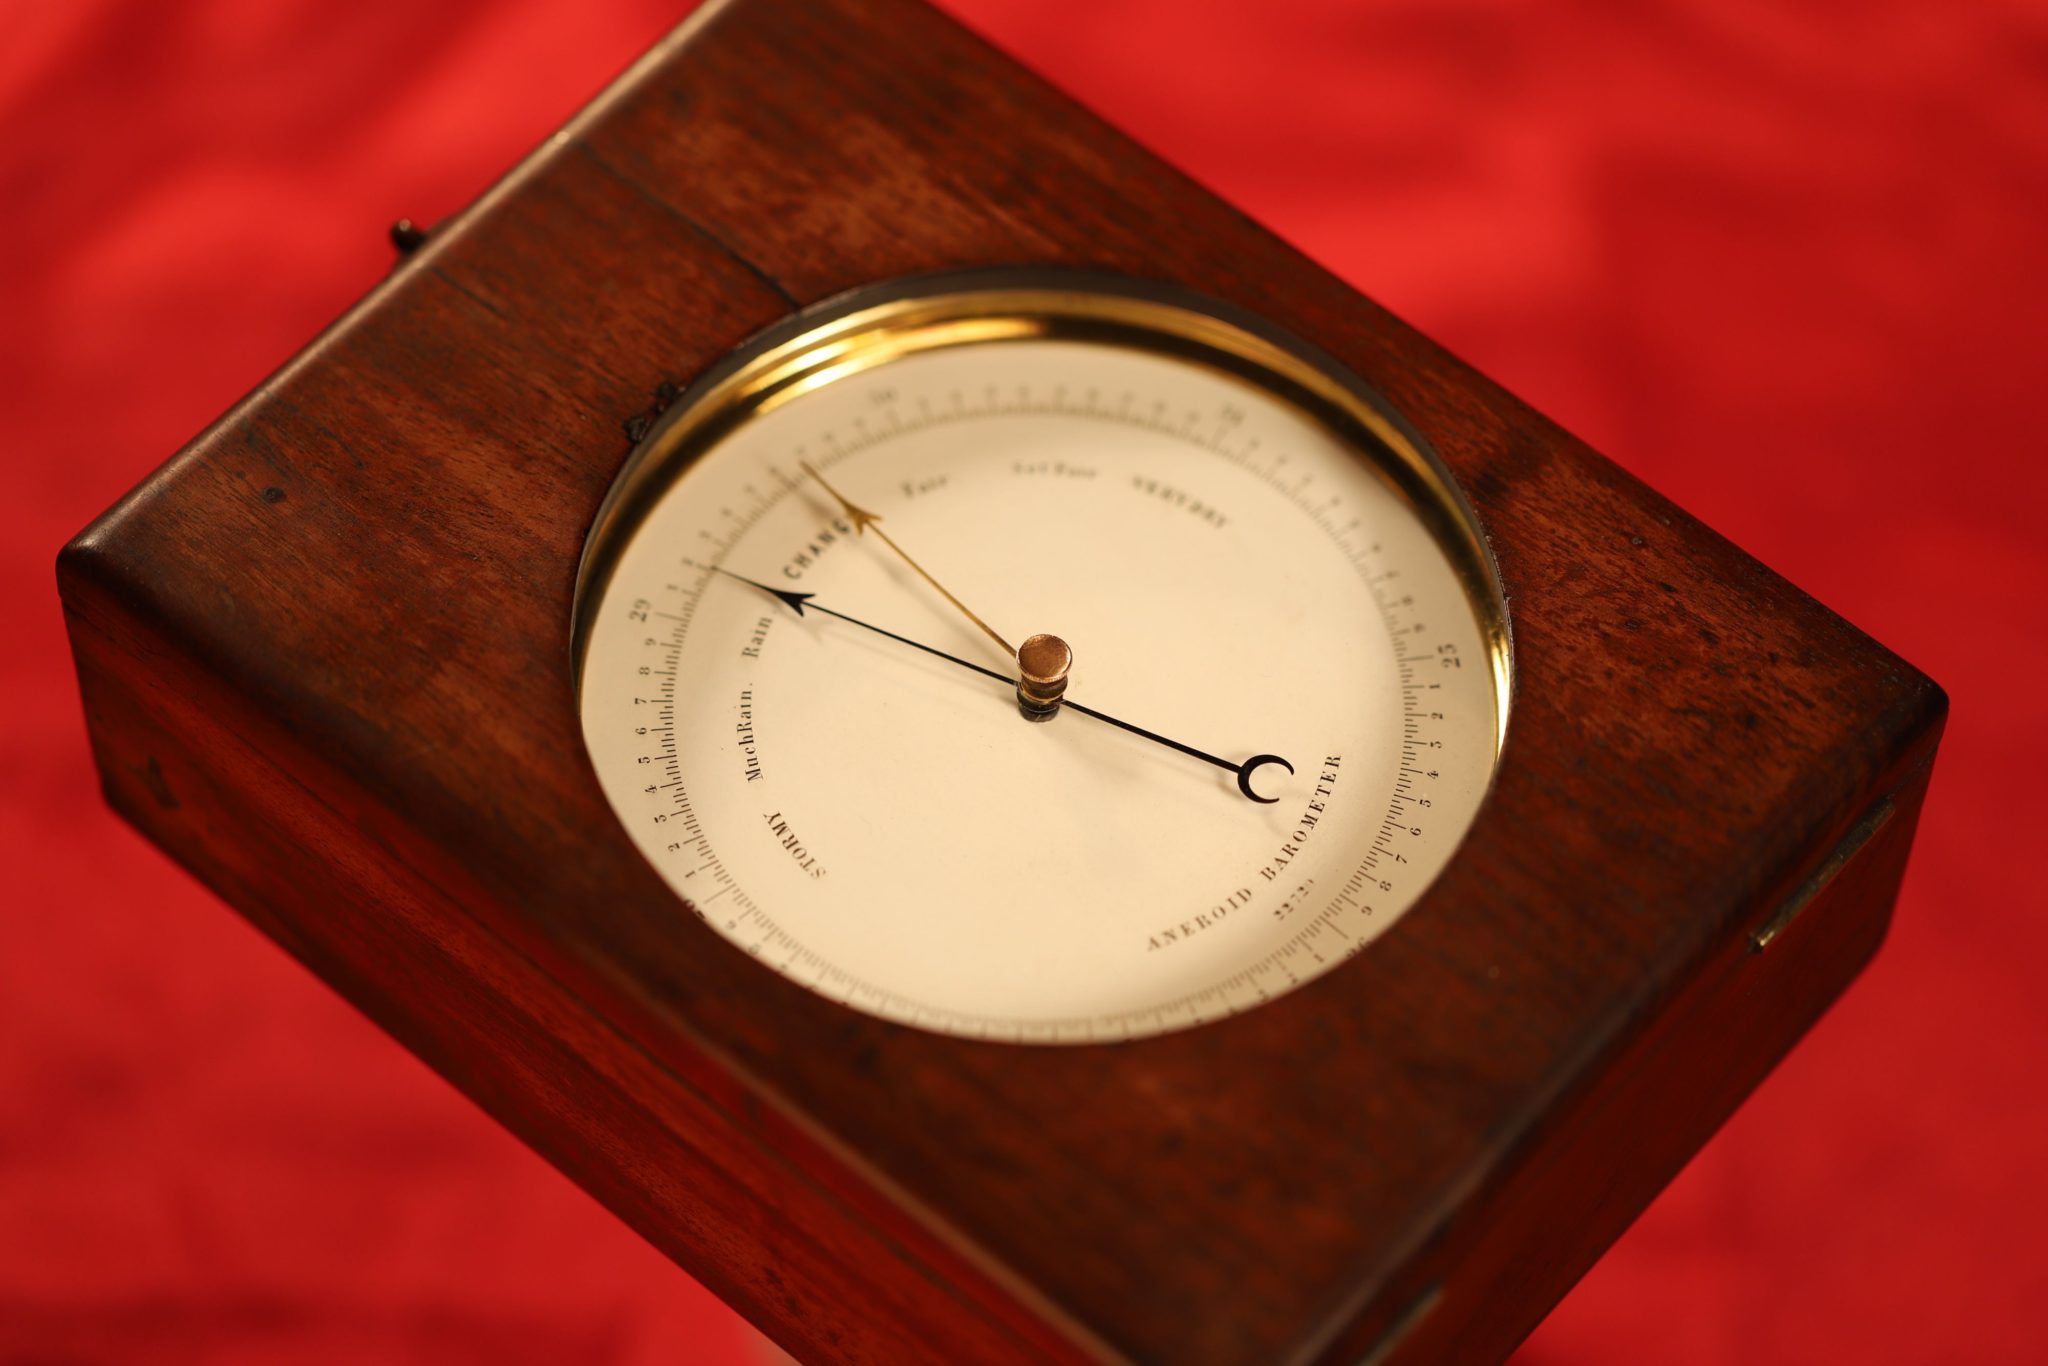 RARE AND INNOVATIVE DENT BAROMETER No 22720 IN DECK CASE c1860